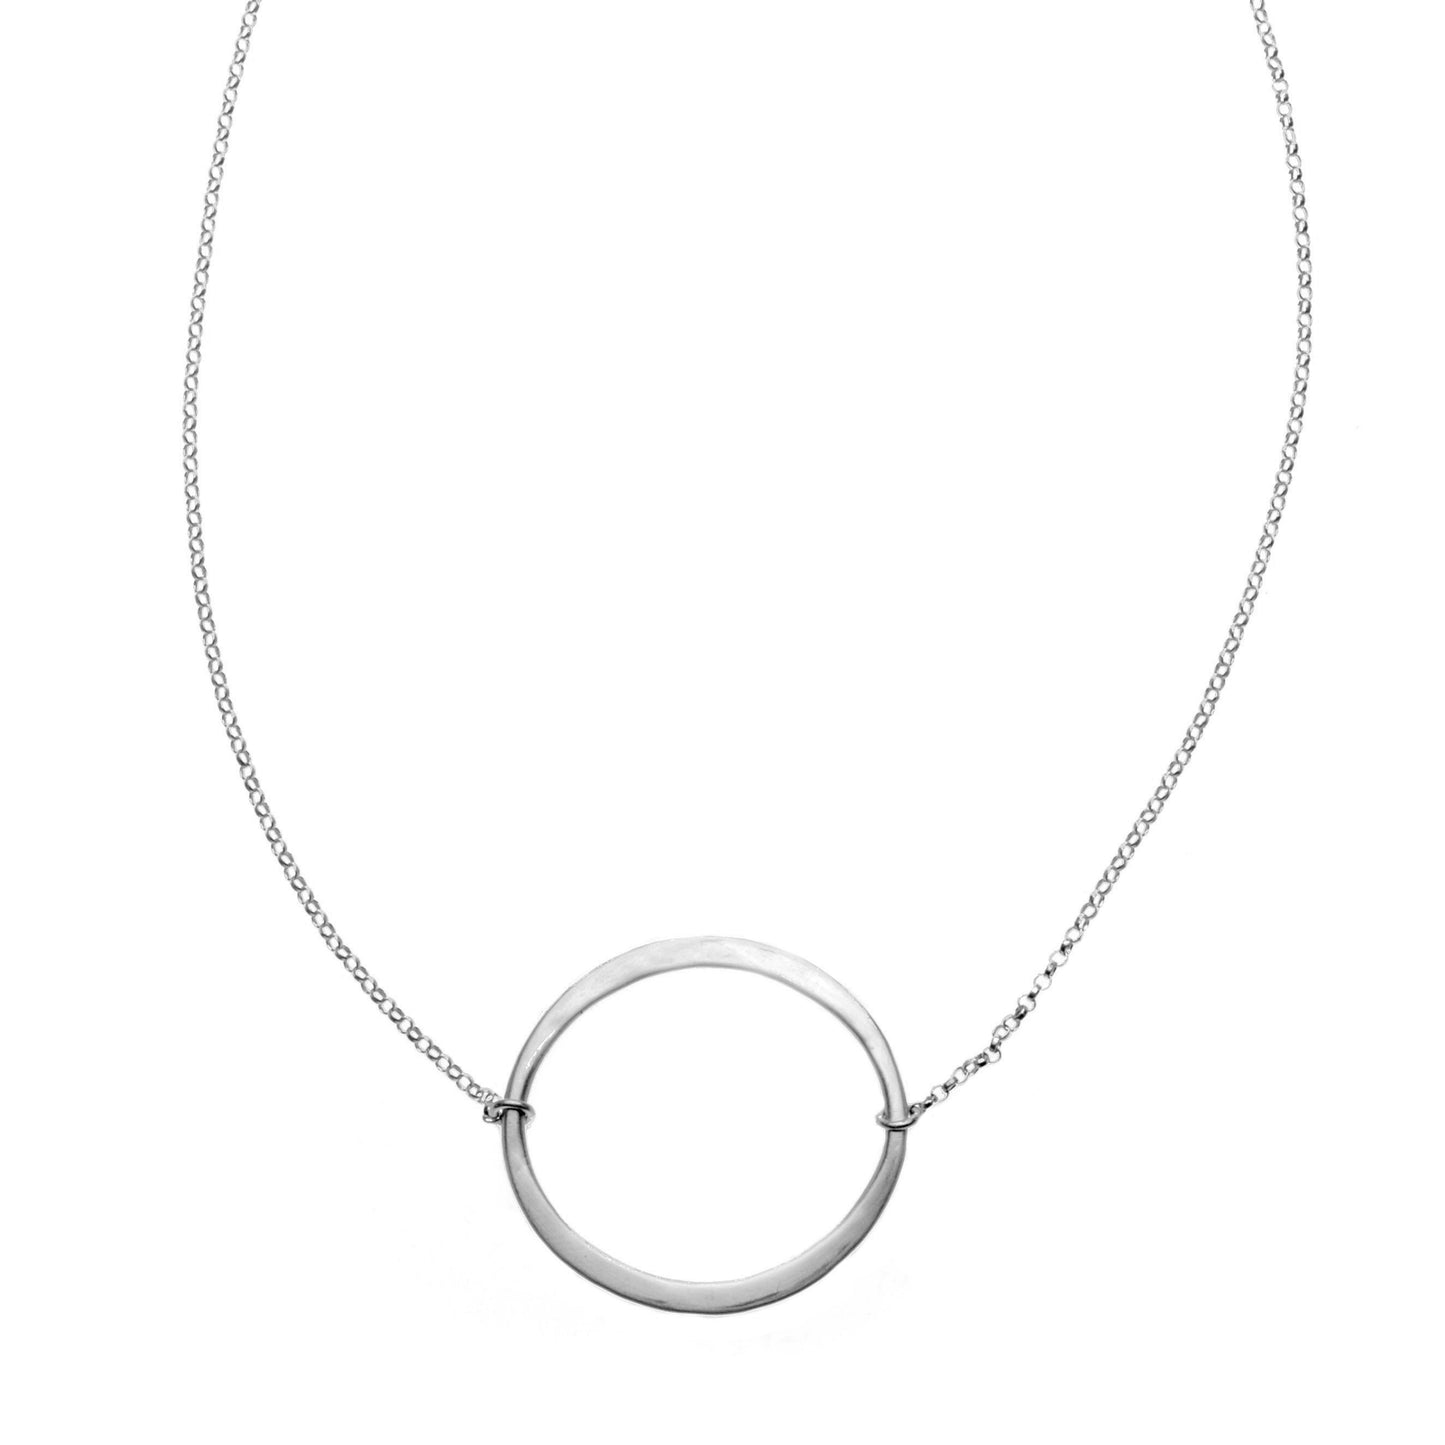 Kai Large Matte Necklace Sterling Silver Chain